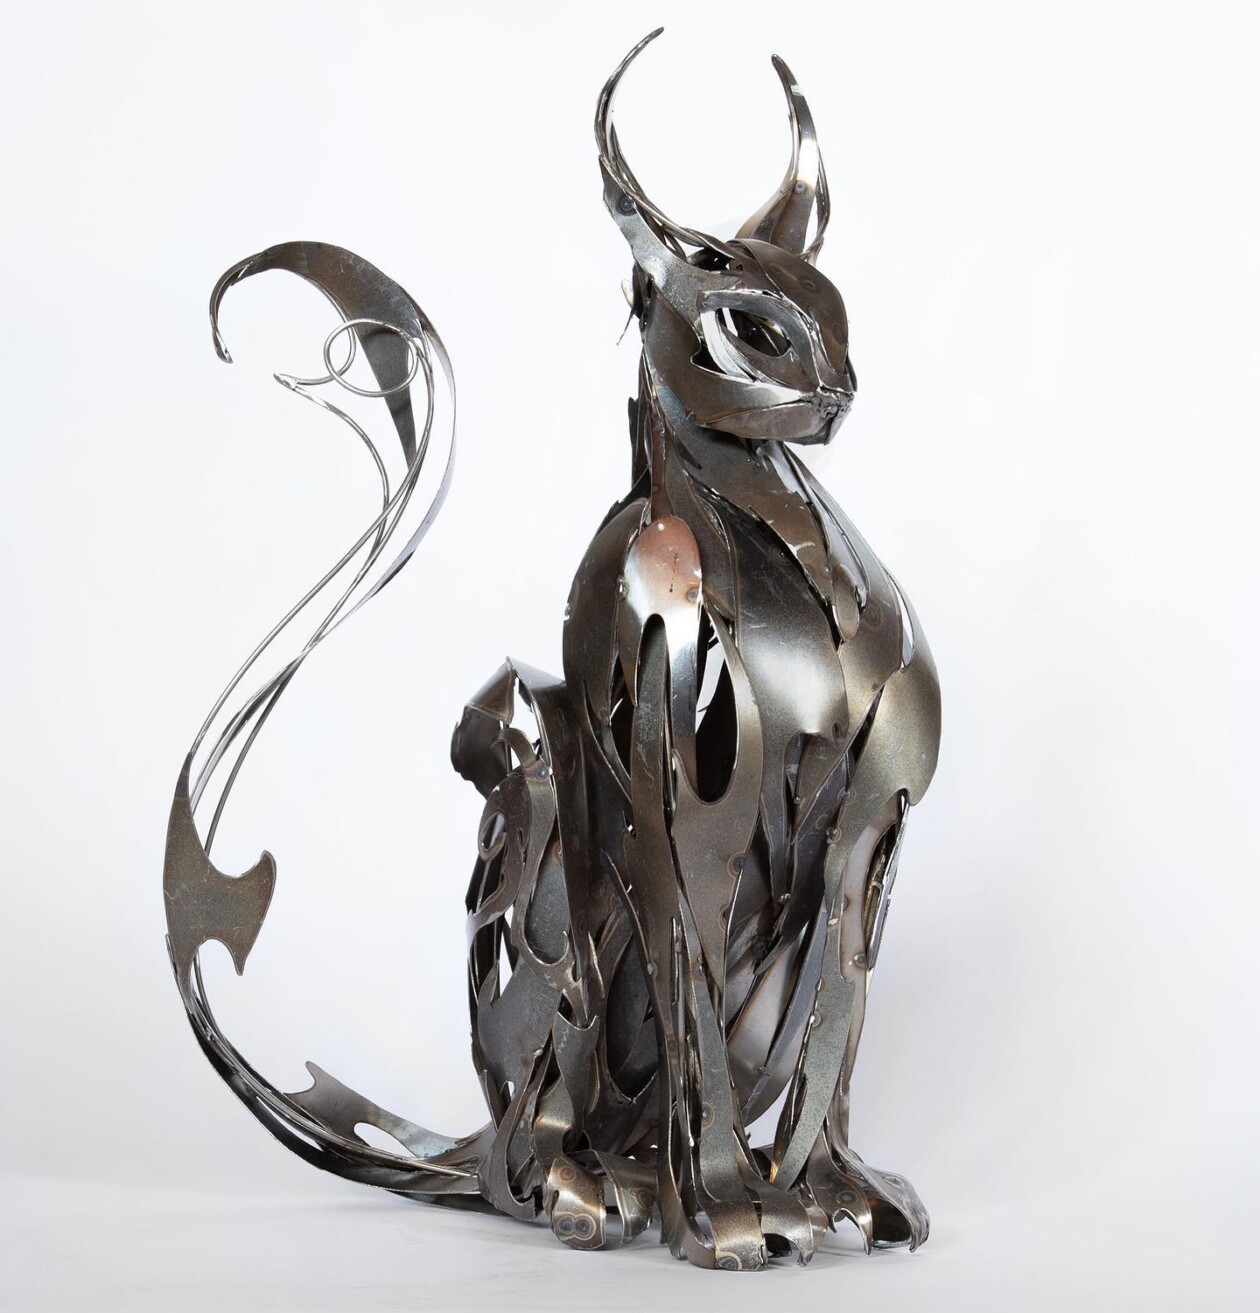 Magnificent Metallic Animal Sculptures Made With Sweeping Lines By Georgie Seccull (12)